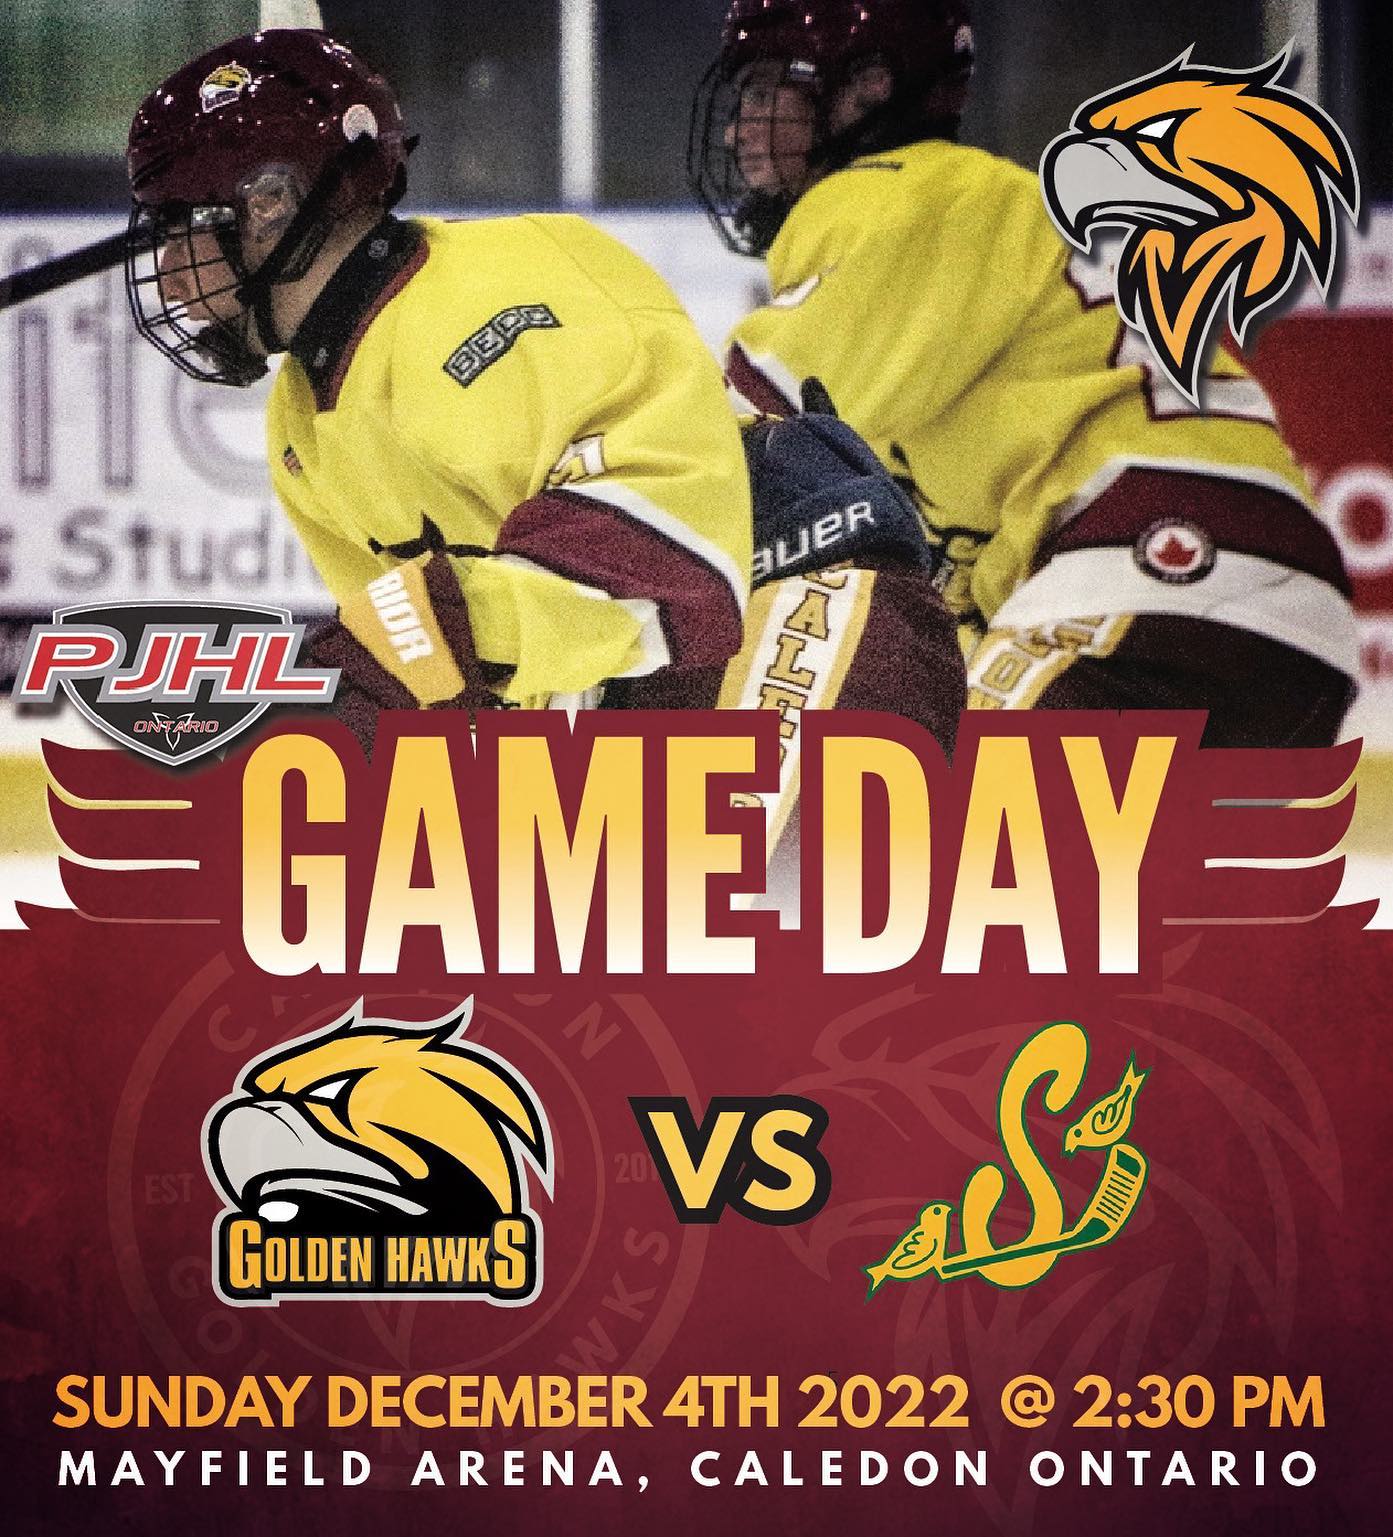 [ GAME DAY ] battle of the birds! Your Caledon Golden Hawks are gearing up to take on the high flying Staynar Siskins at our home nest Sunday December 4th @ 2:30 pm Mayfield Arena. COME OUT AND WATCH!  #noquit #letsgo #caledongoldenhawks #pjhl #juniorhockey #ready